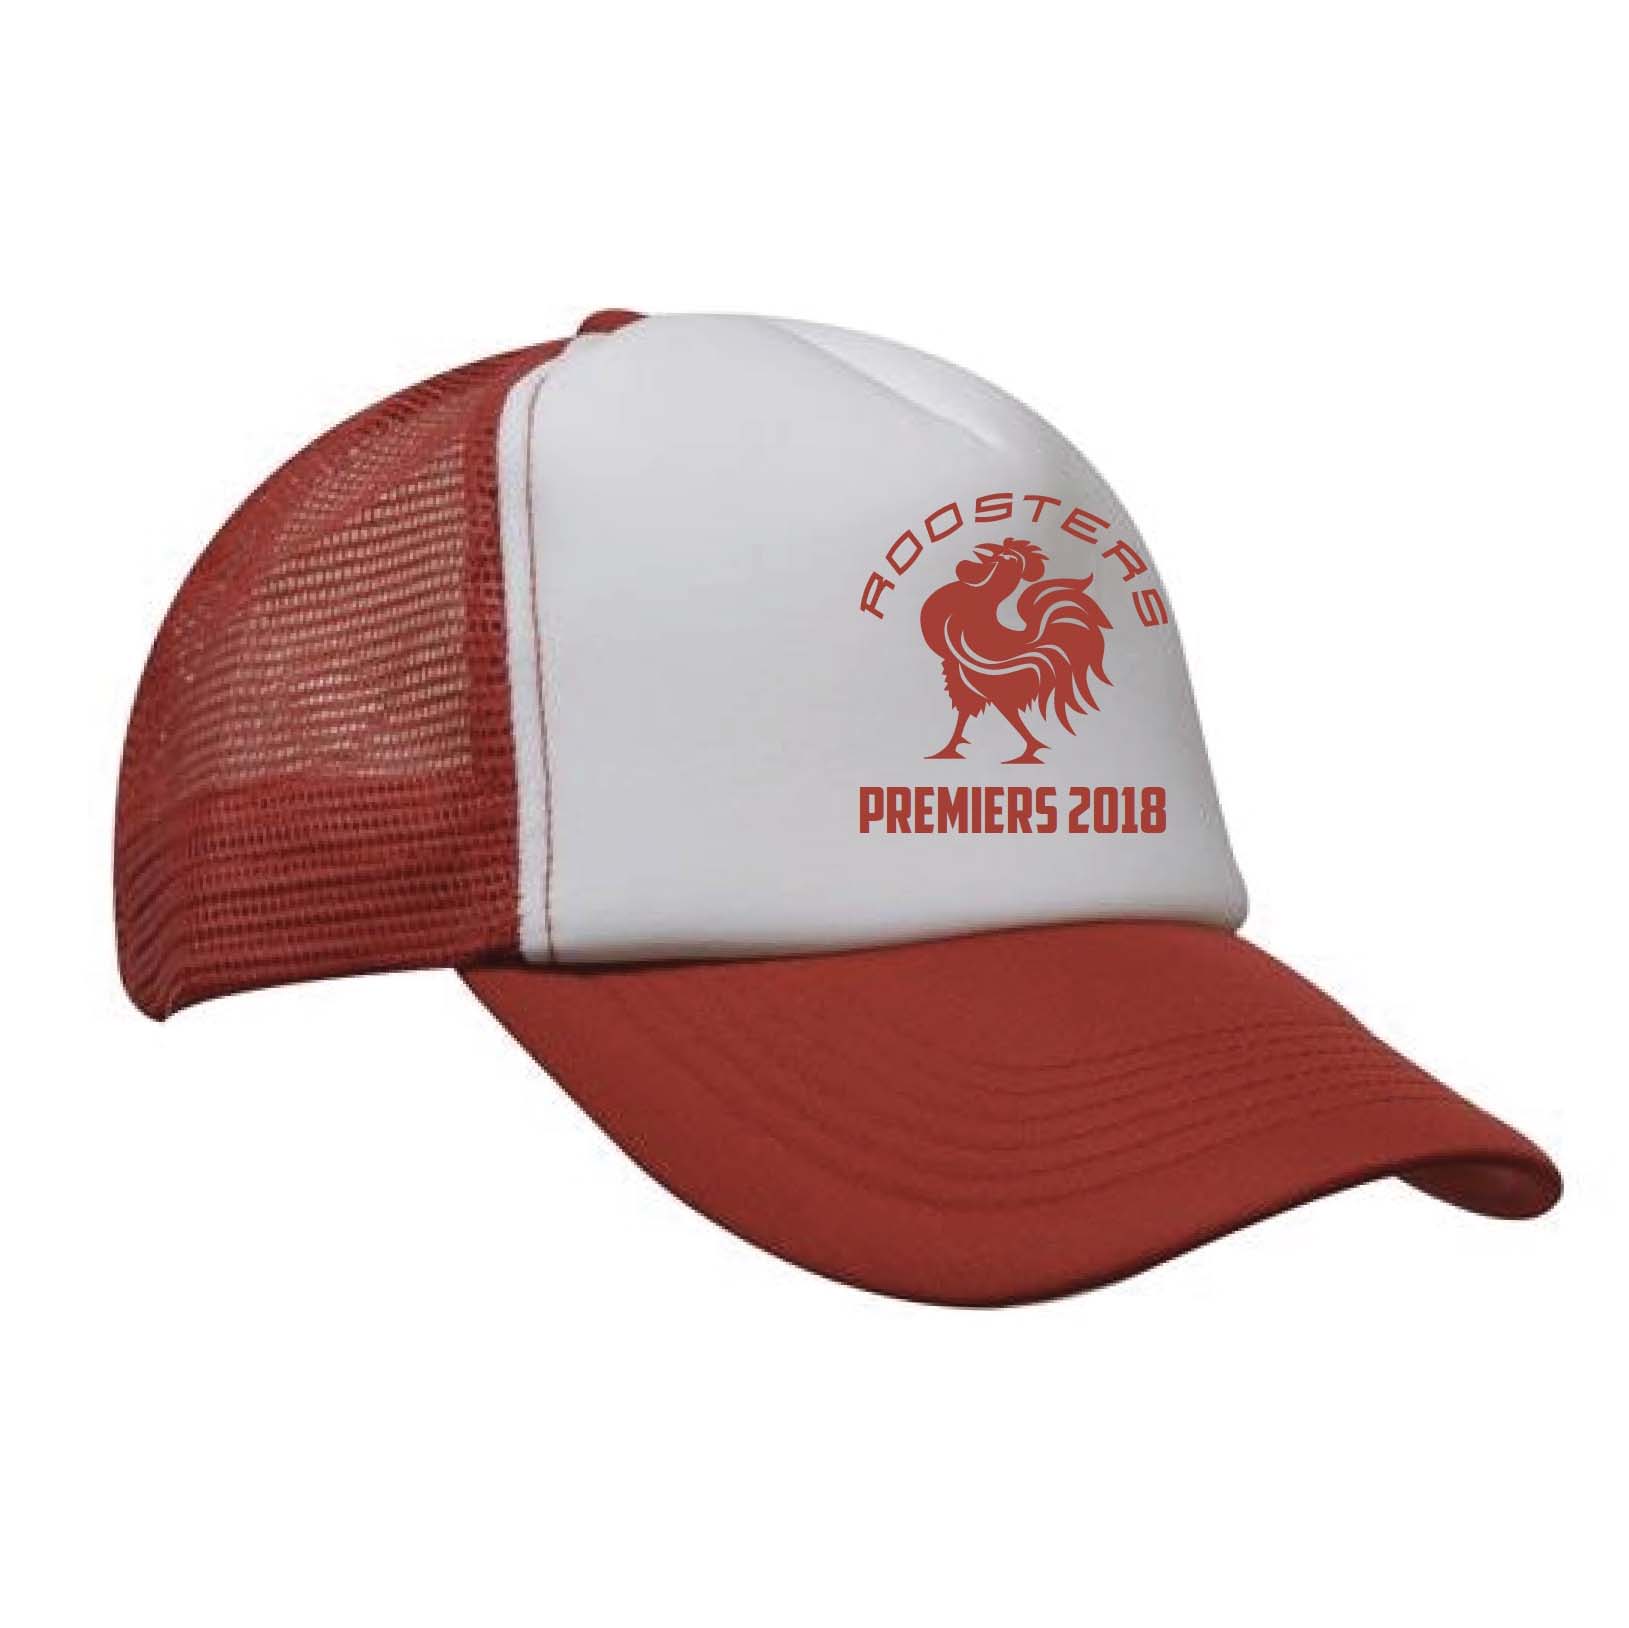 NAFC ROOSTERS PREMIERS TRUCKER CAP WHITE-RED